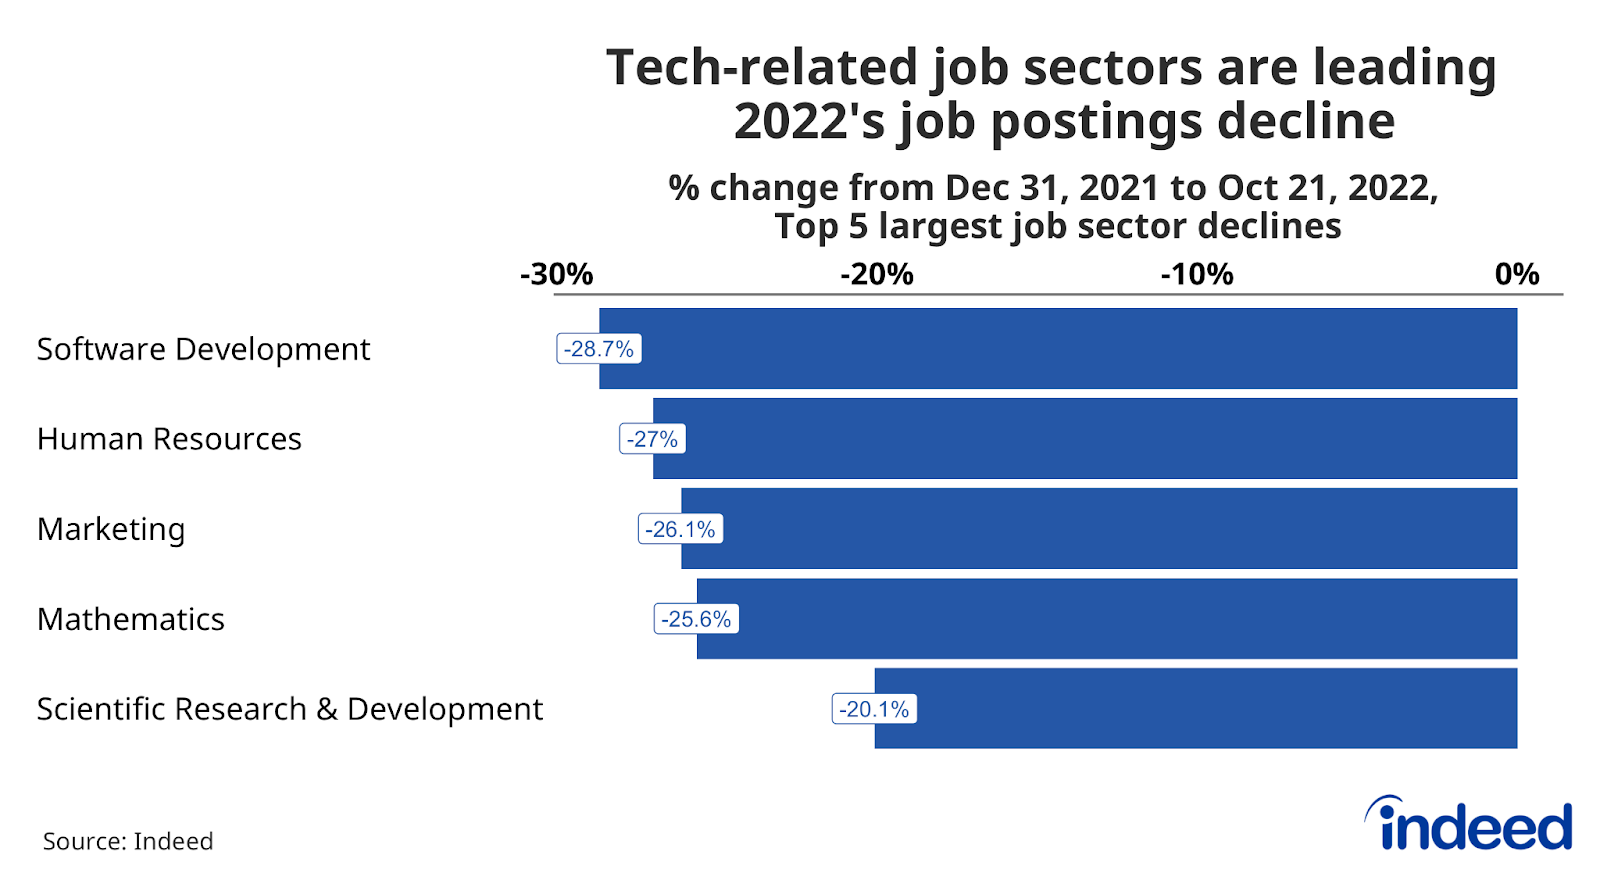 A bar chart titled “Tech-related job sectors are leading 2022’s job postings decline.”